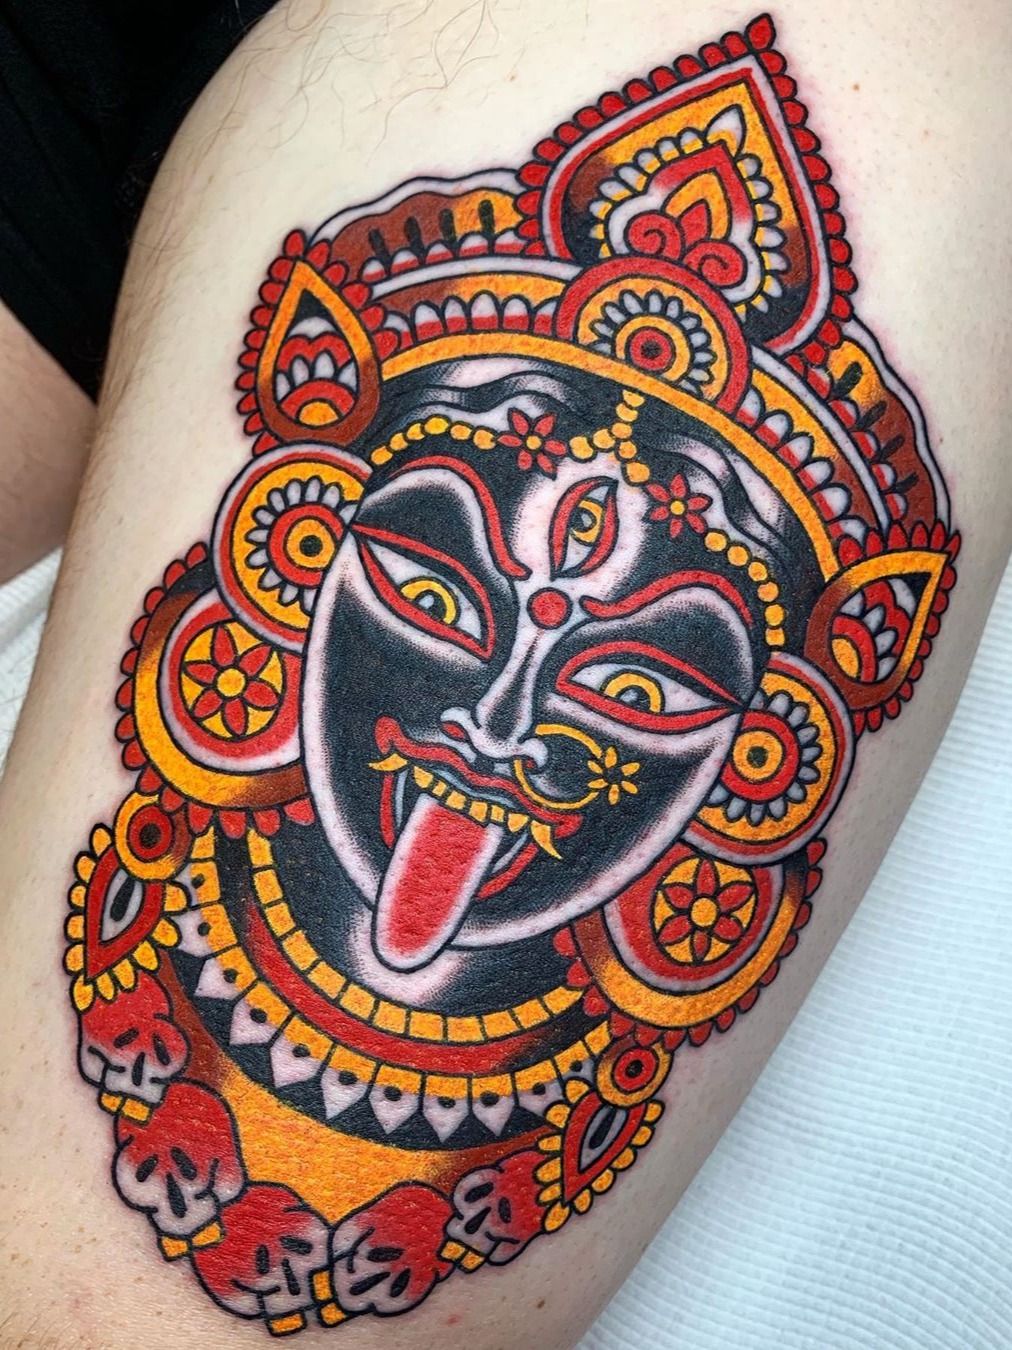 What can I do to fix my offensive Kali tattoo? - Quora